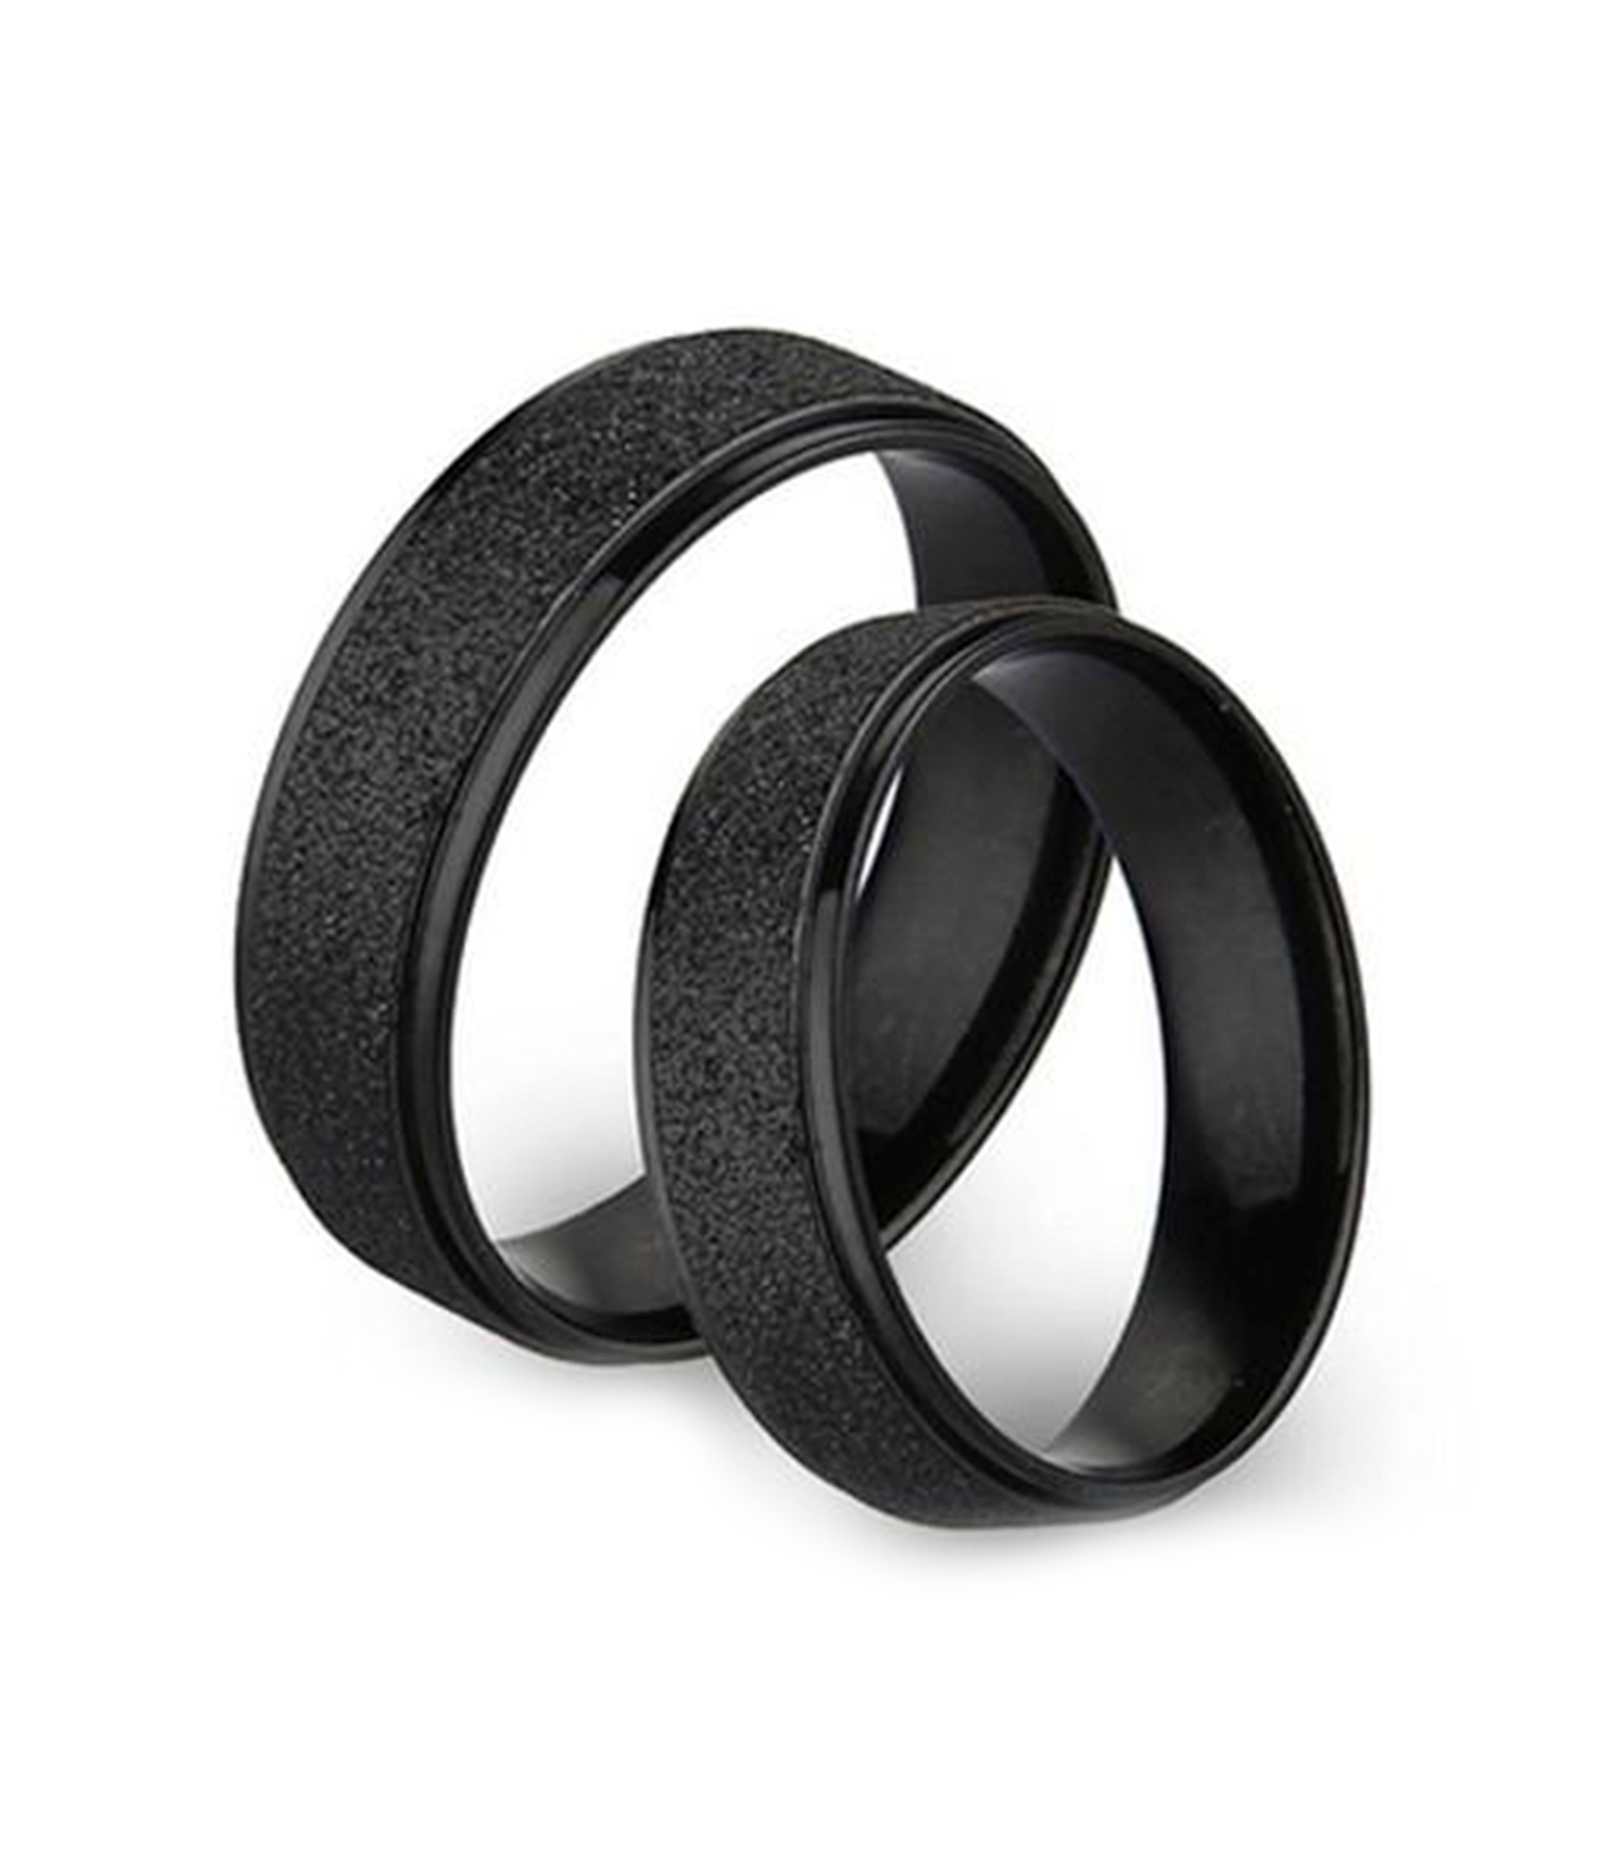 Frosted Black Titanium Couple Ring